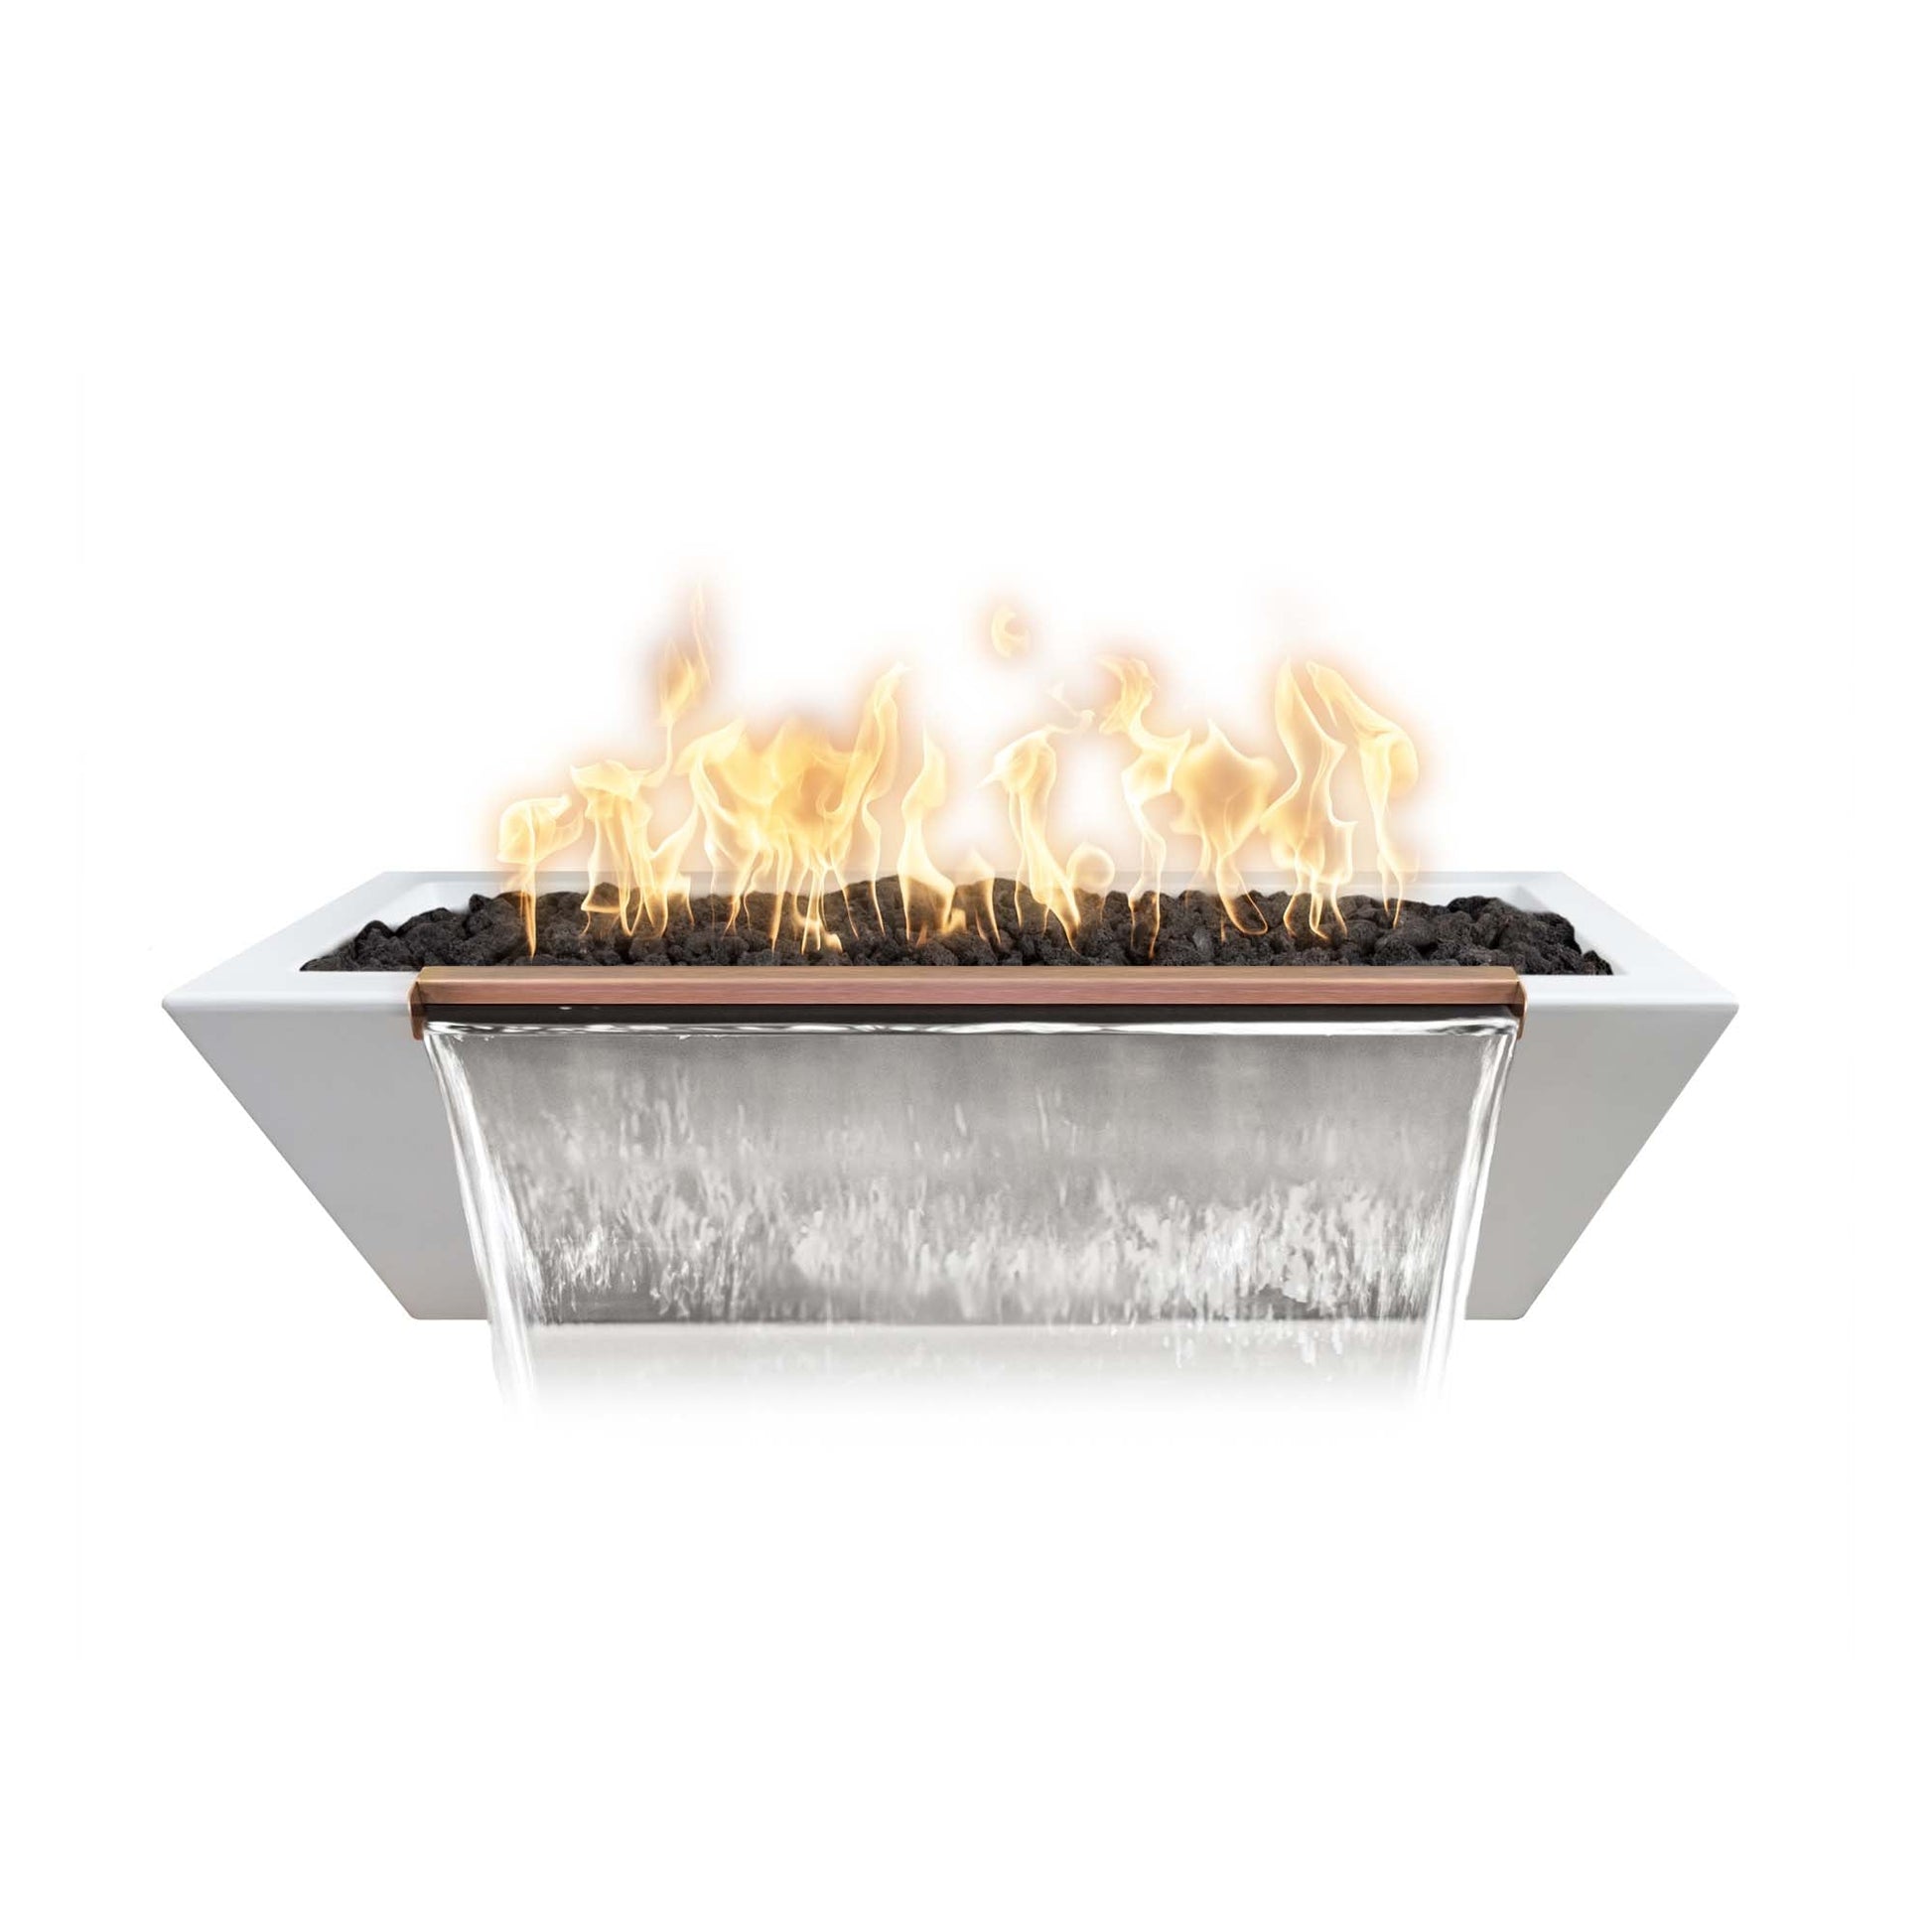 The Outdoor Plus Linear Maya 60" Metallic Silver GFRC Concrete Natural Gas Fire & Water Bowl with Match Lit with Flame Sense Ignition